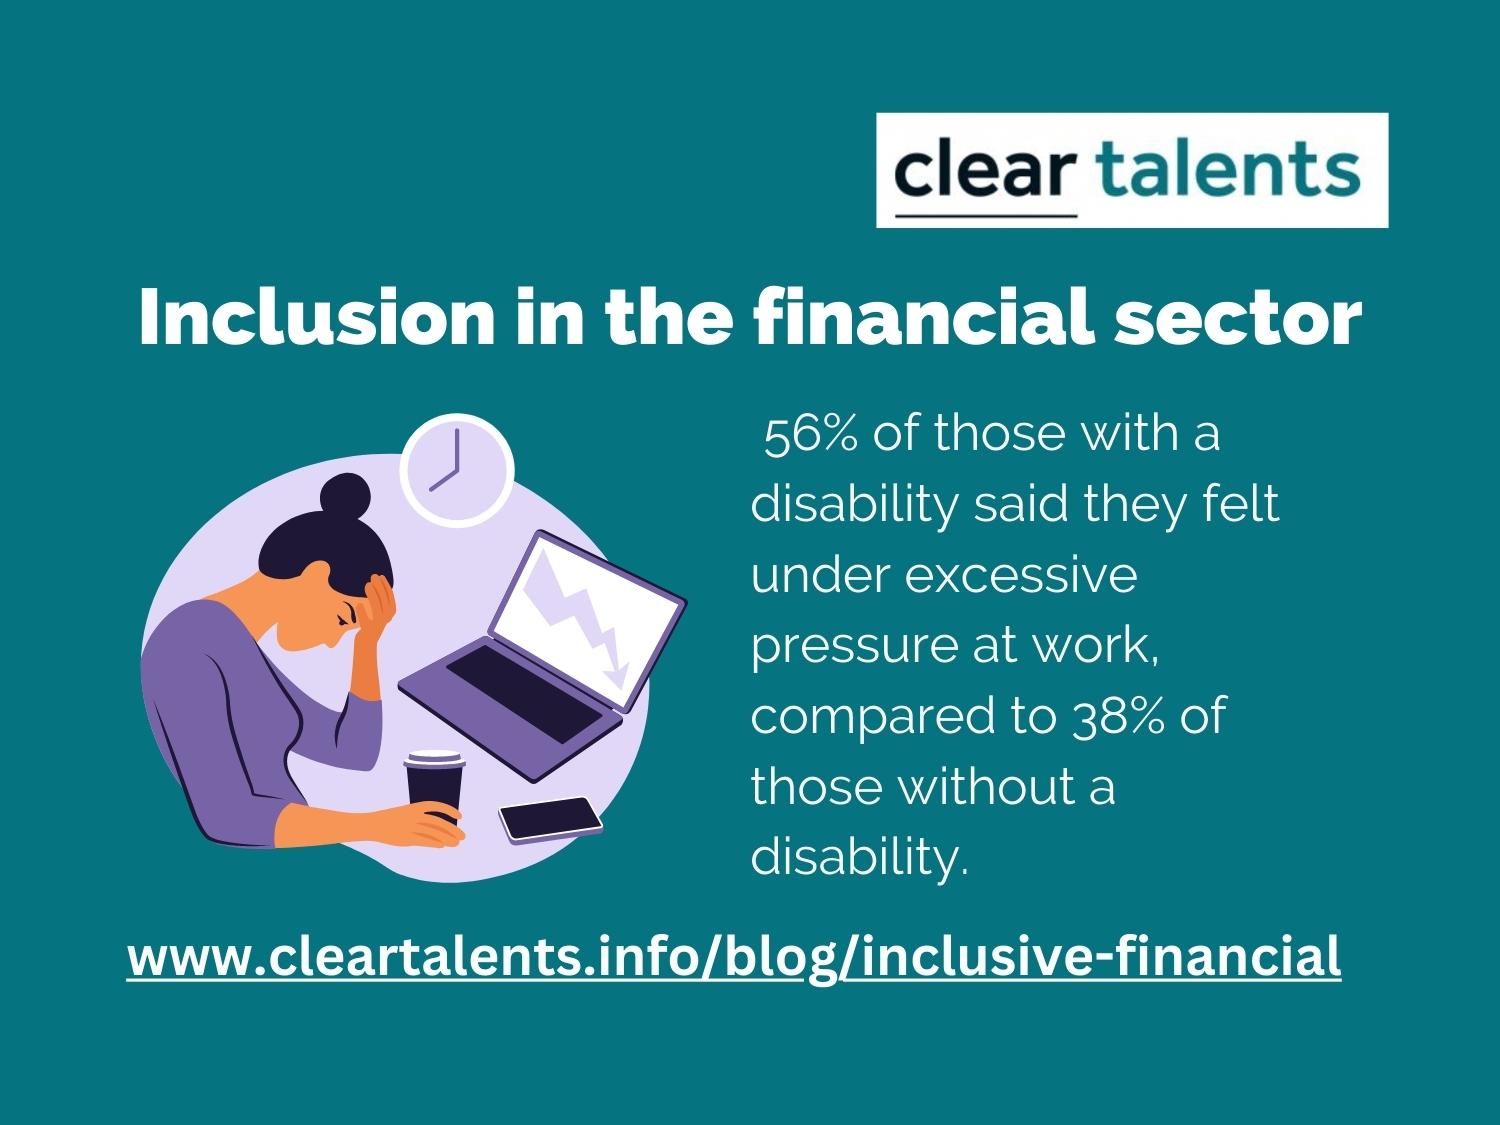  56% of those with a disability said they felt under excessive pressure at work, compared to 38% of those without a disability.